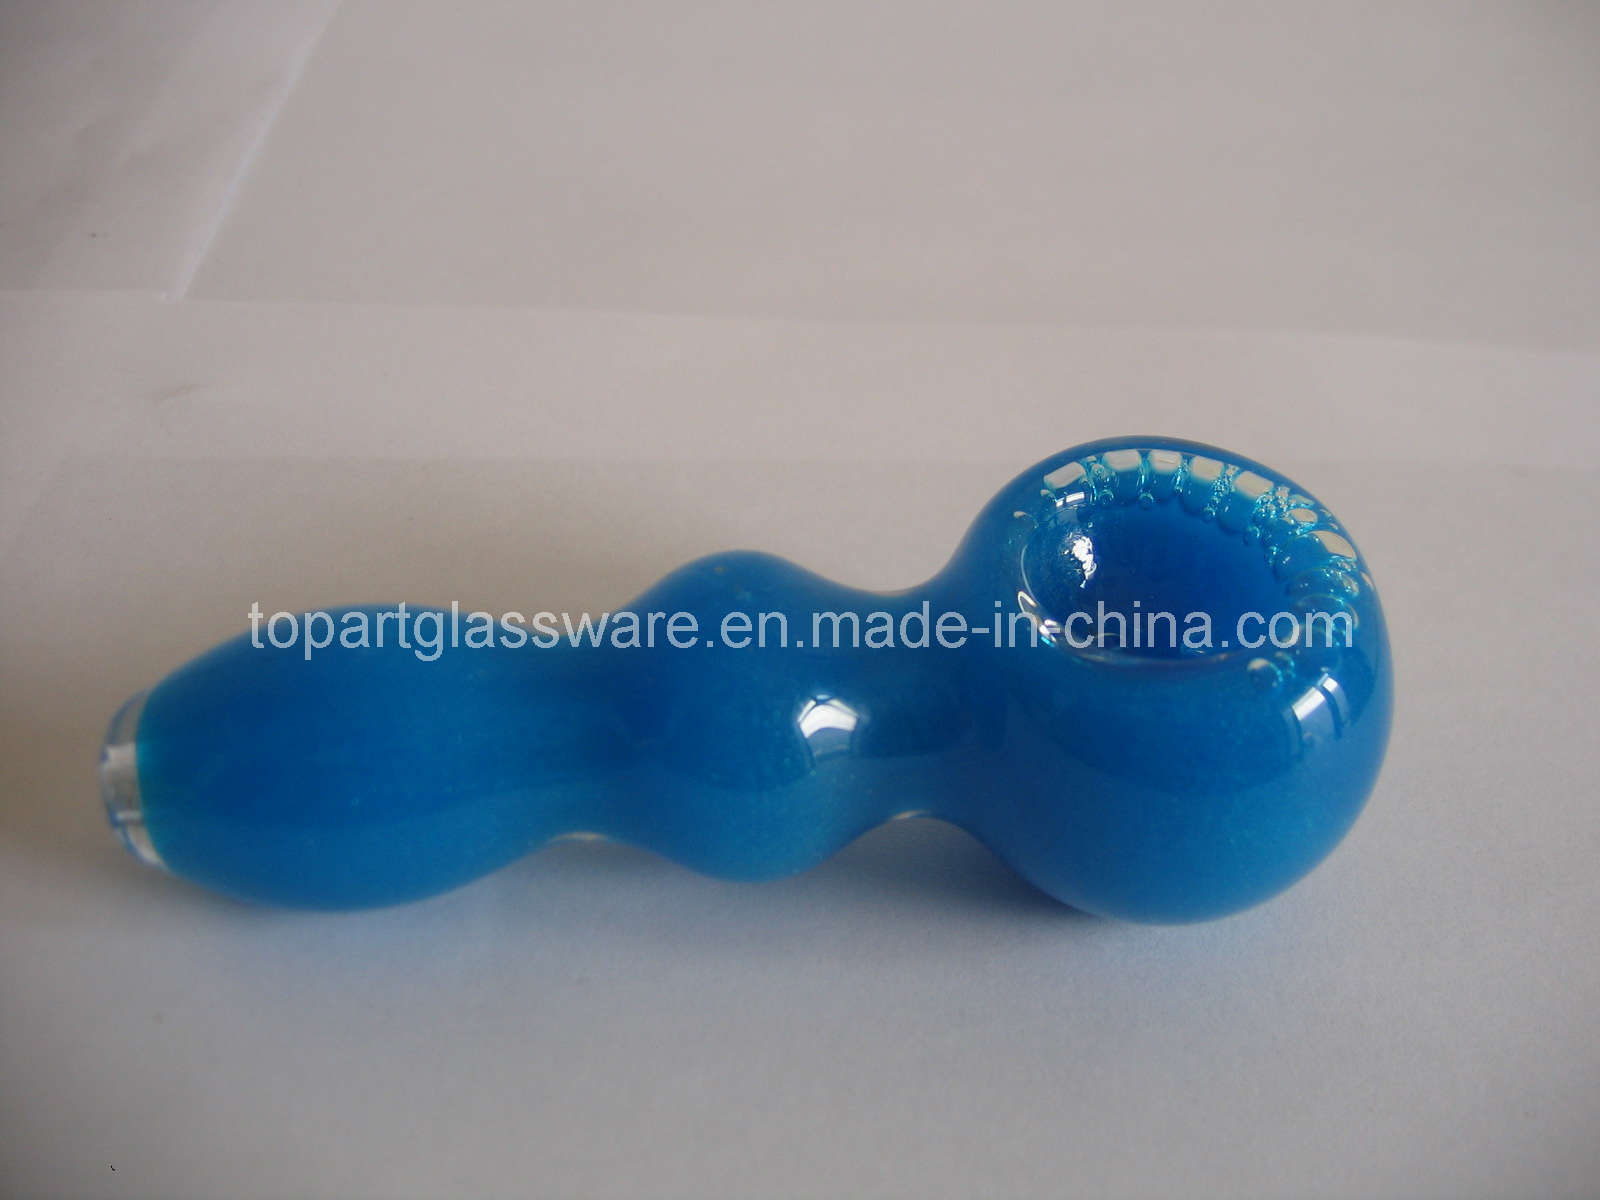 Liquid Filled Glass Spoon Smoking Pipe, Water Tobacco Pipes